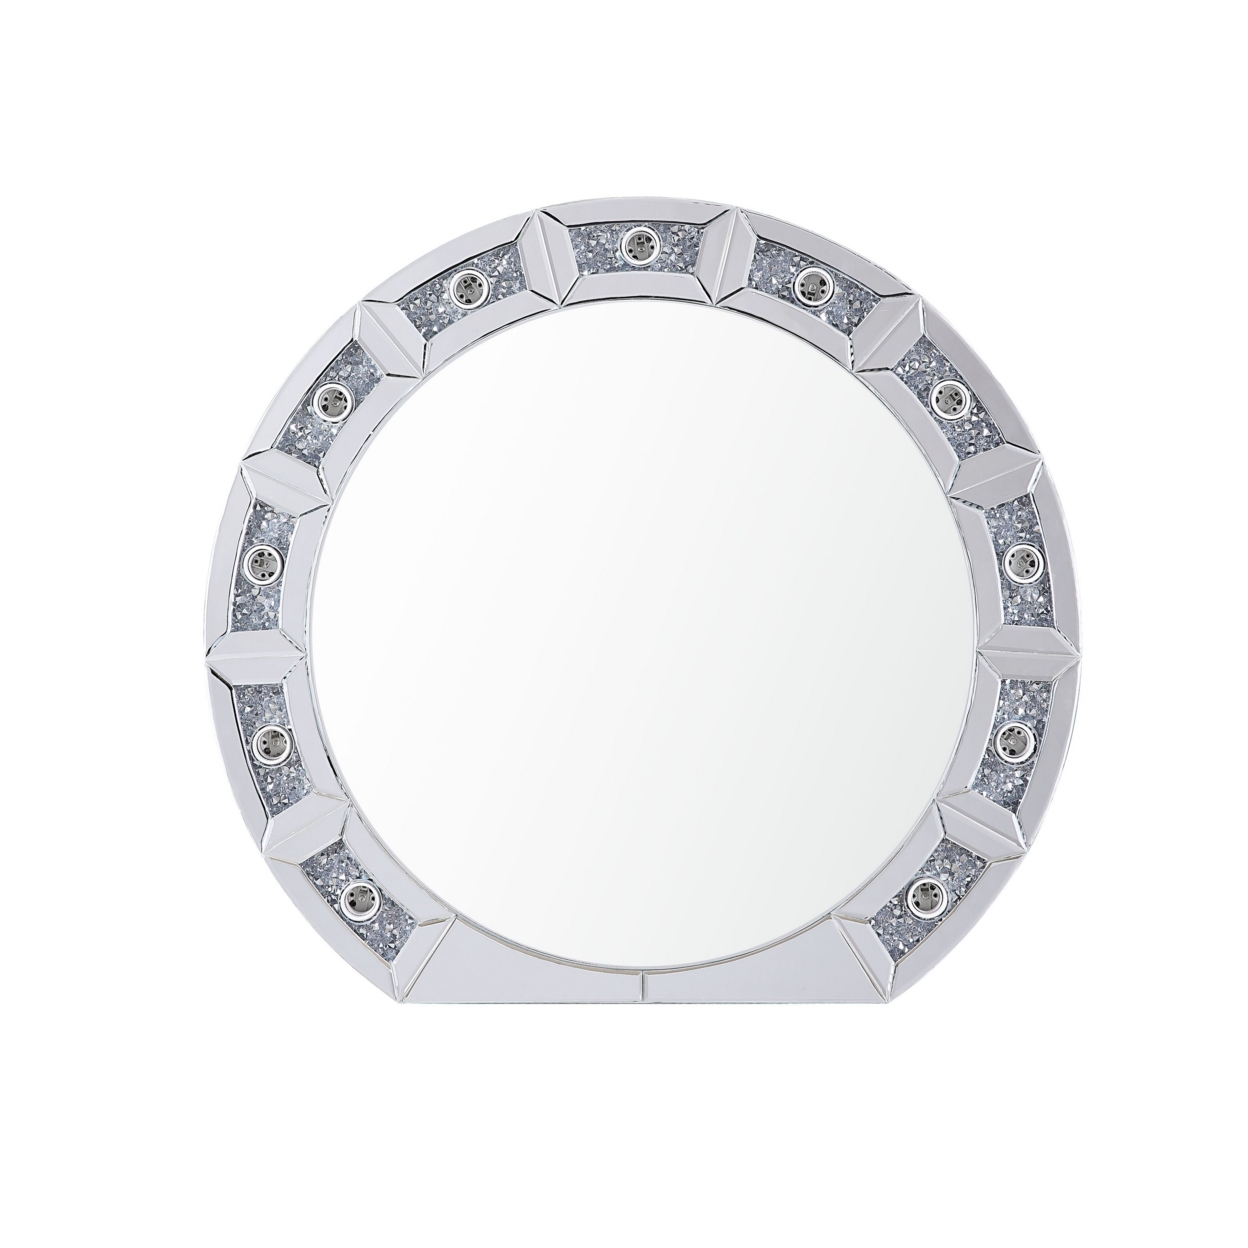 Round Mirror Panel Wall Decor With Light Function And Faux Diamond, Silver- Saltoro Sherpi